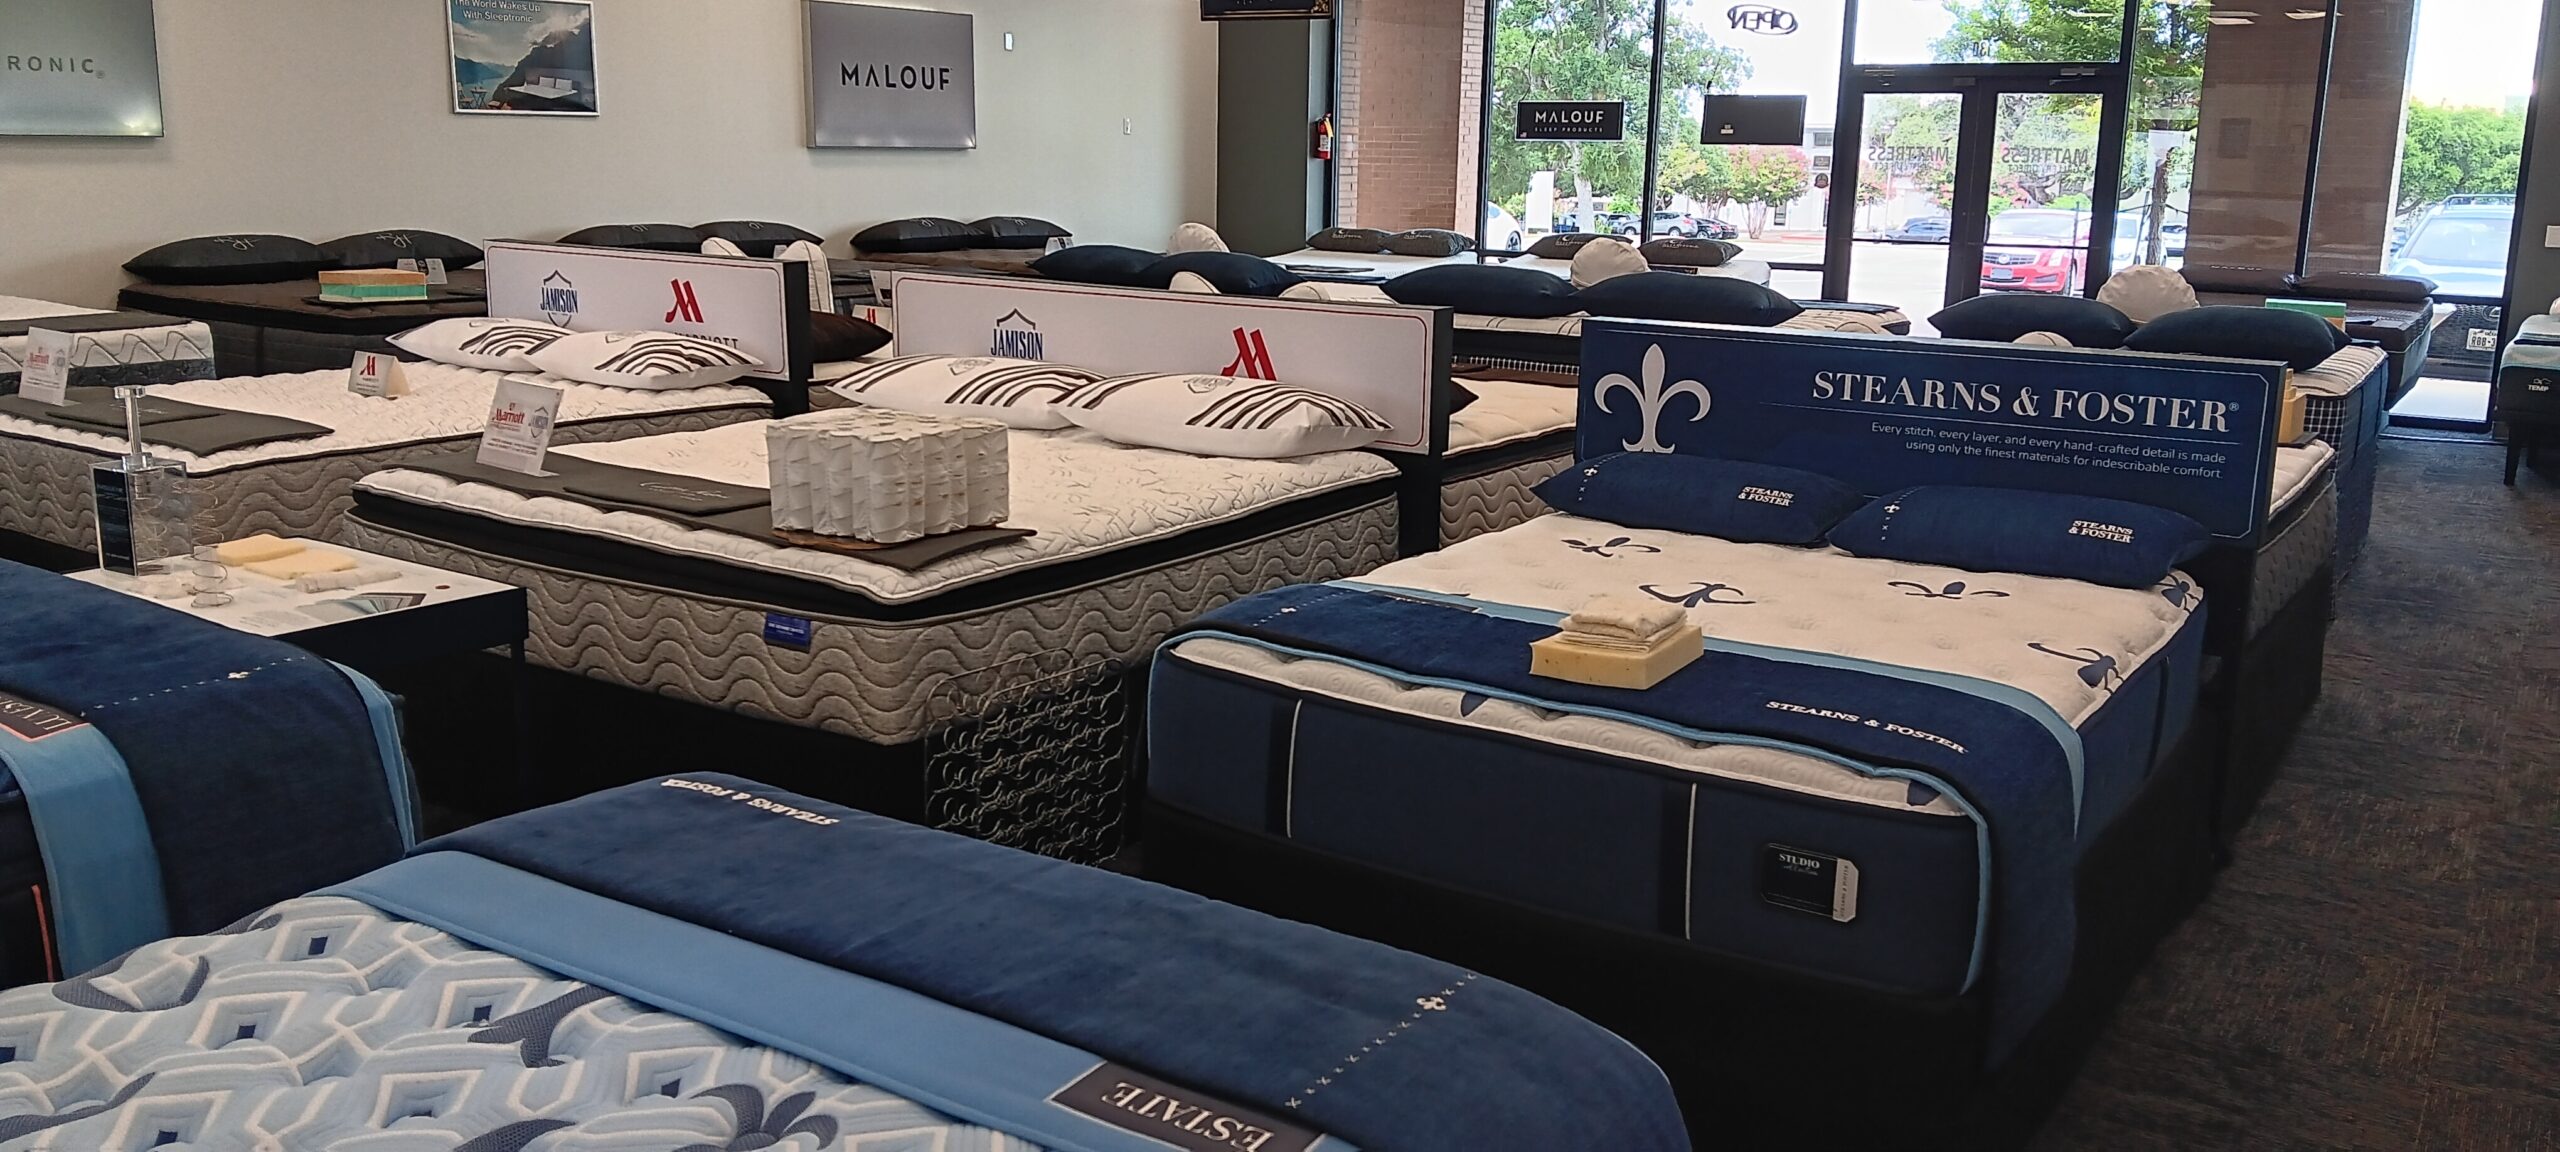 One of the Largest Mattress Stores